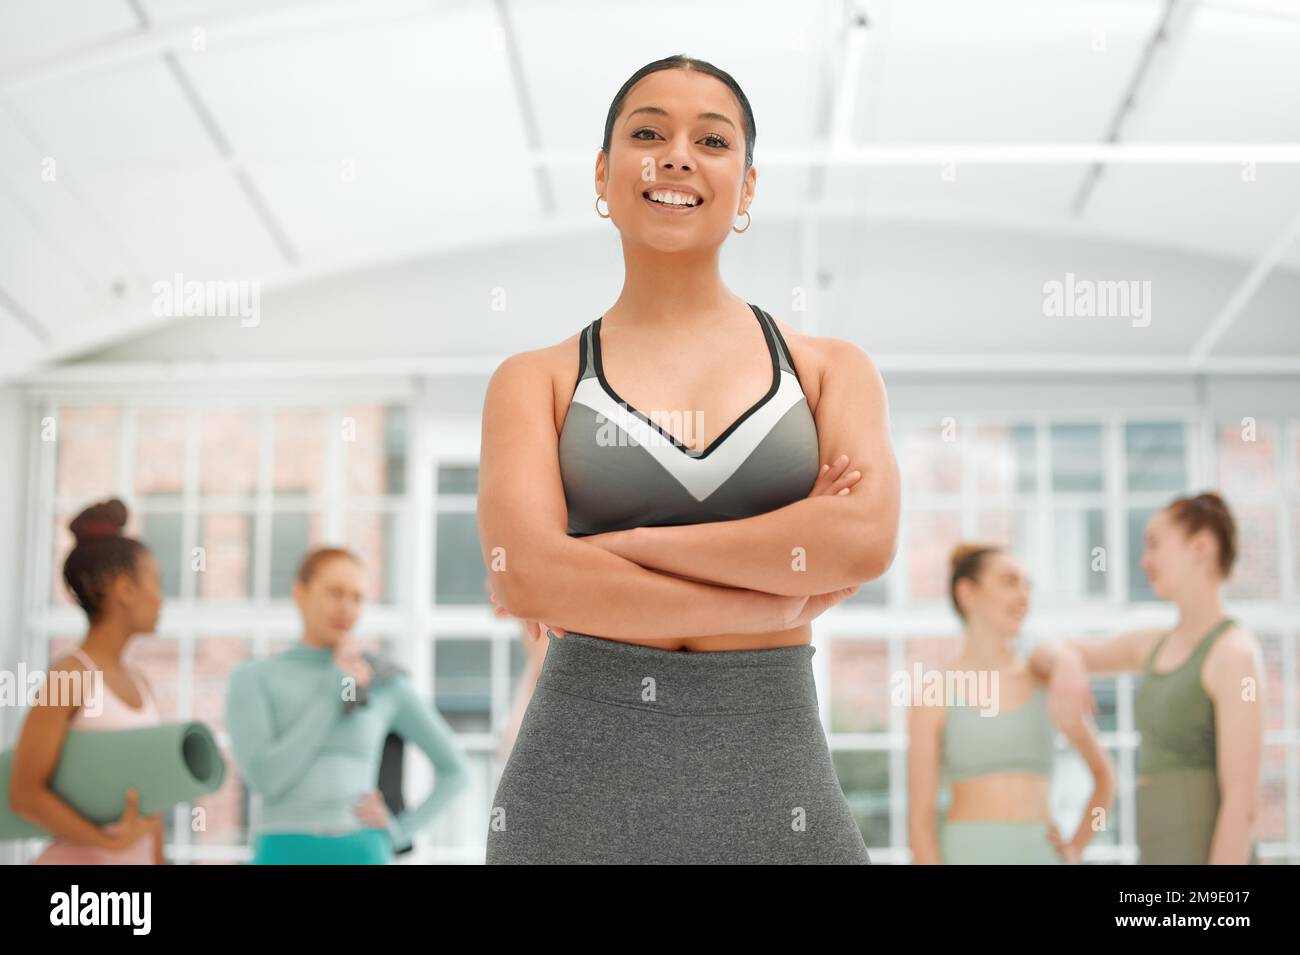 Nothing is more fun than seeing results. a beautiful young woman at a fitness class. Stock Photo